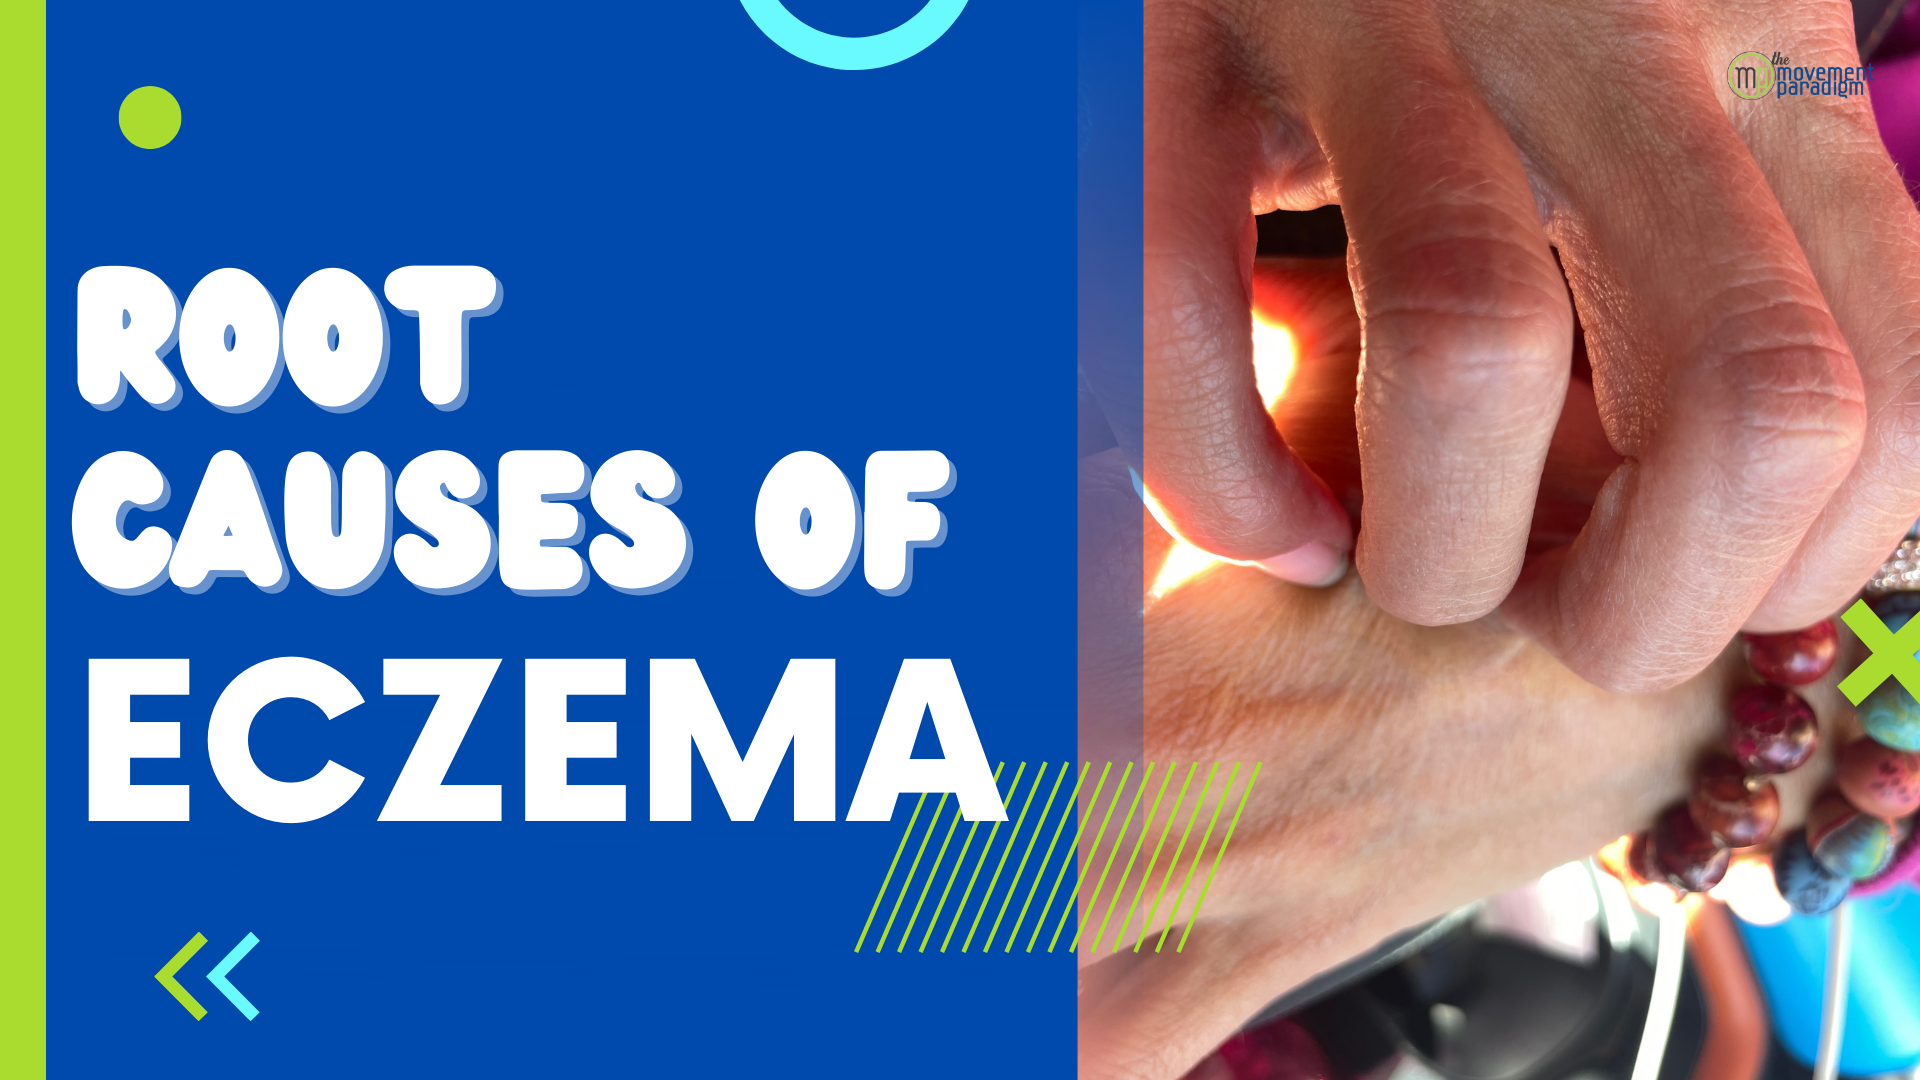 Root causes of eczema